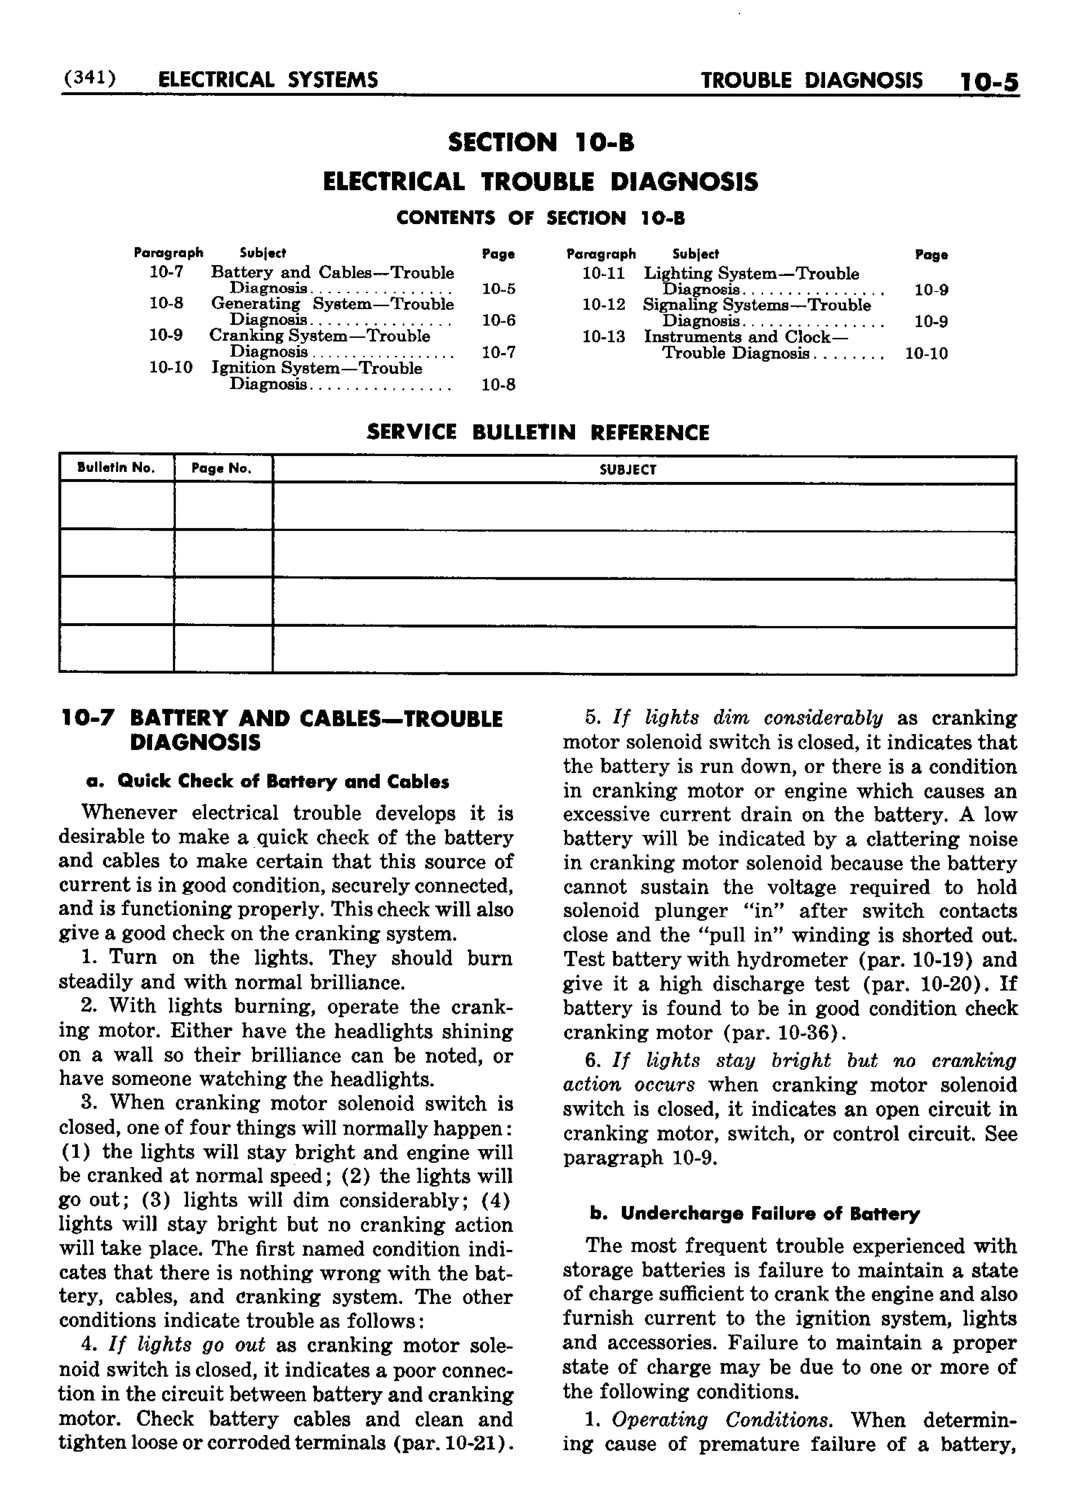 n_11 1952 Buick Shop Manual - Electrical Systems-005-005.jpg